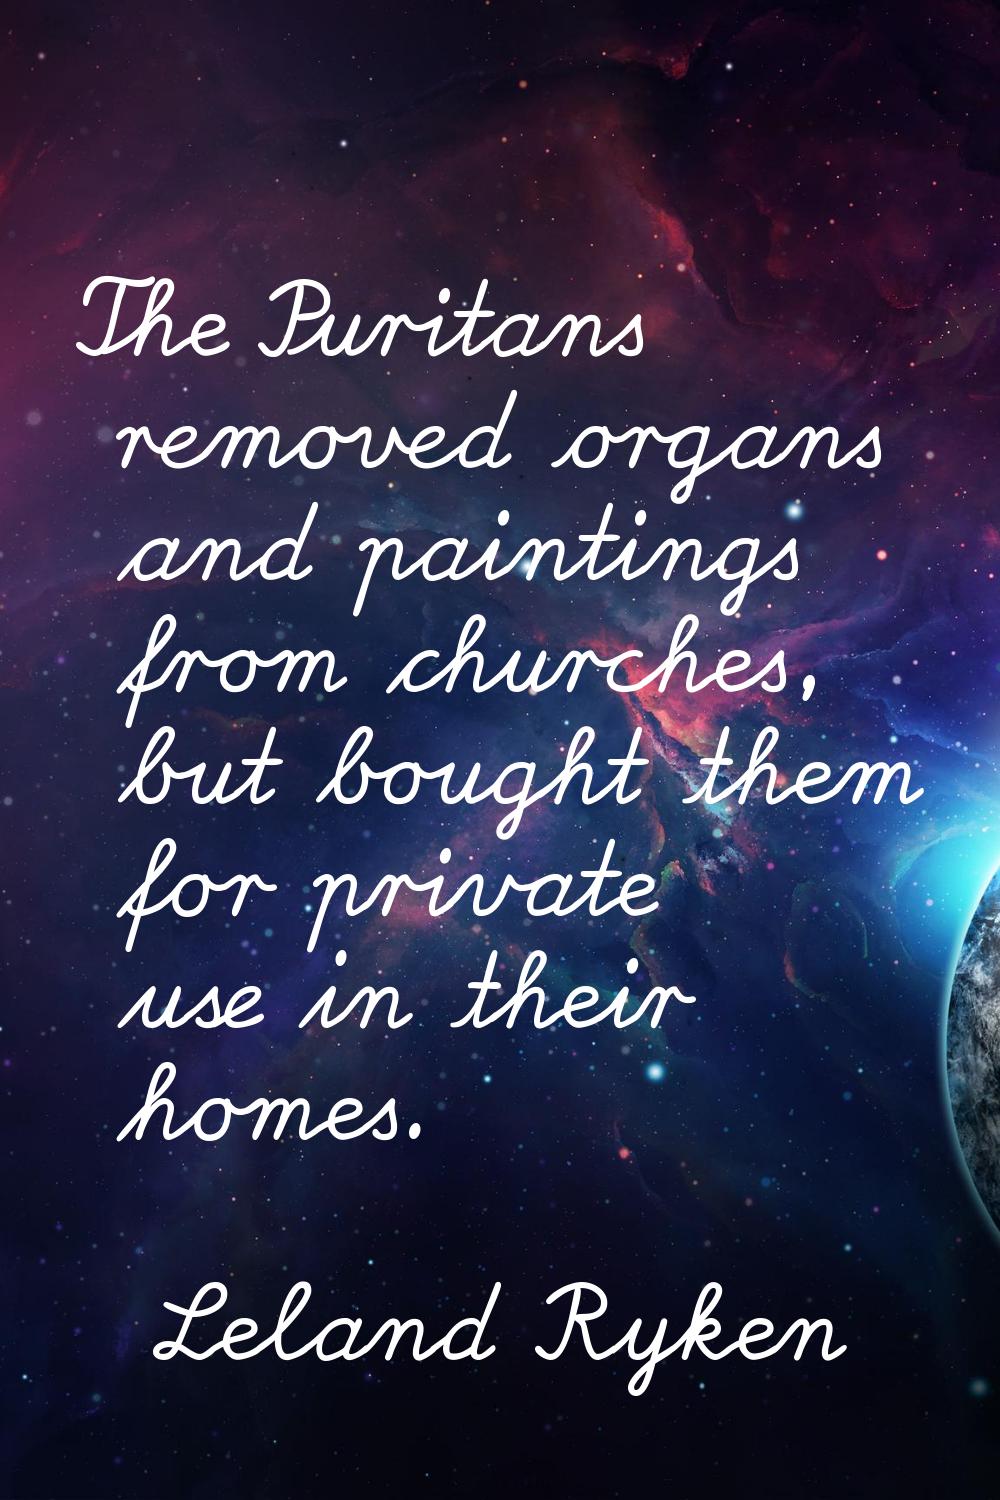 The Puritans removed organs and paintings from churches, but bought them for private use in their h